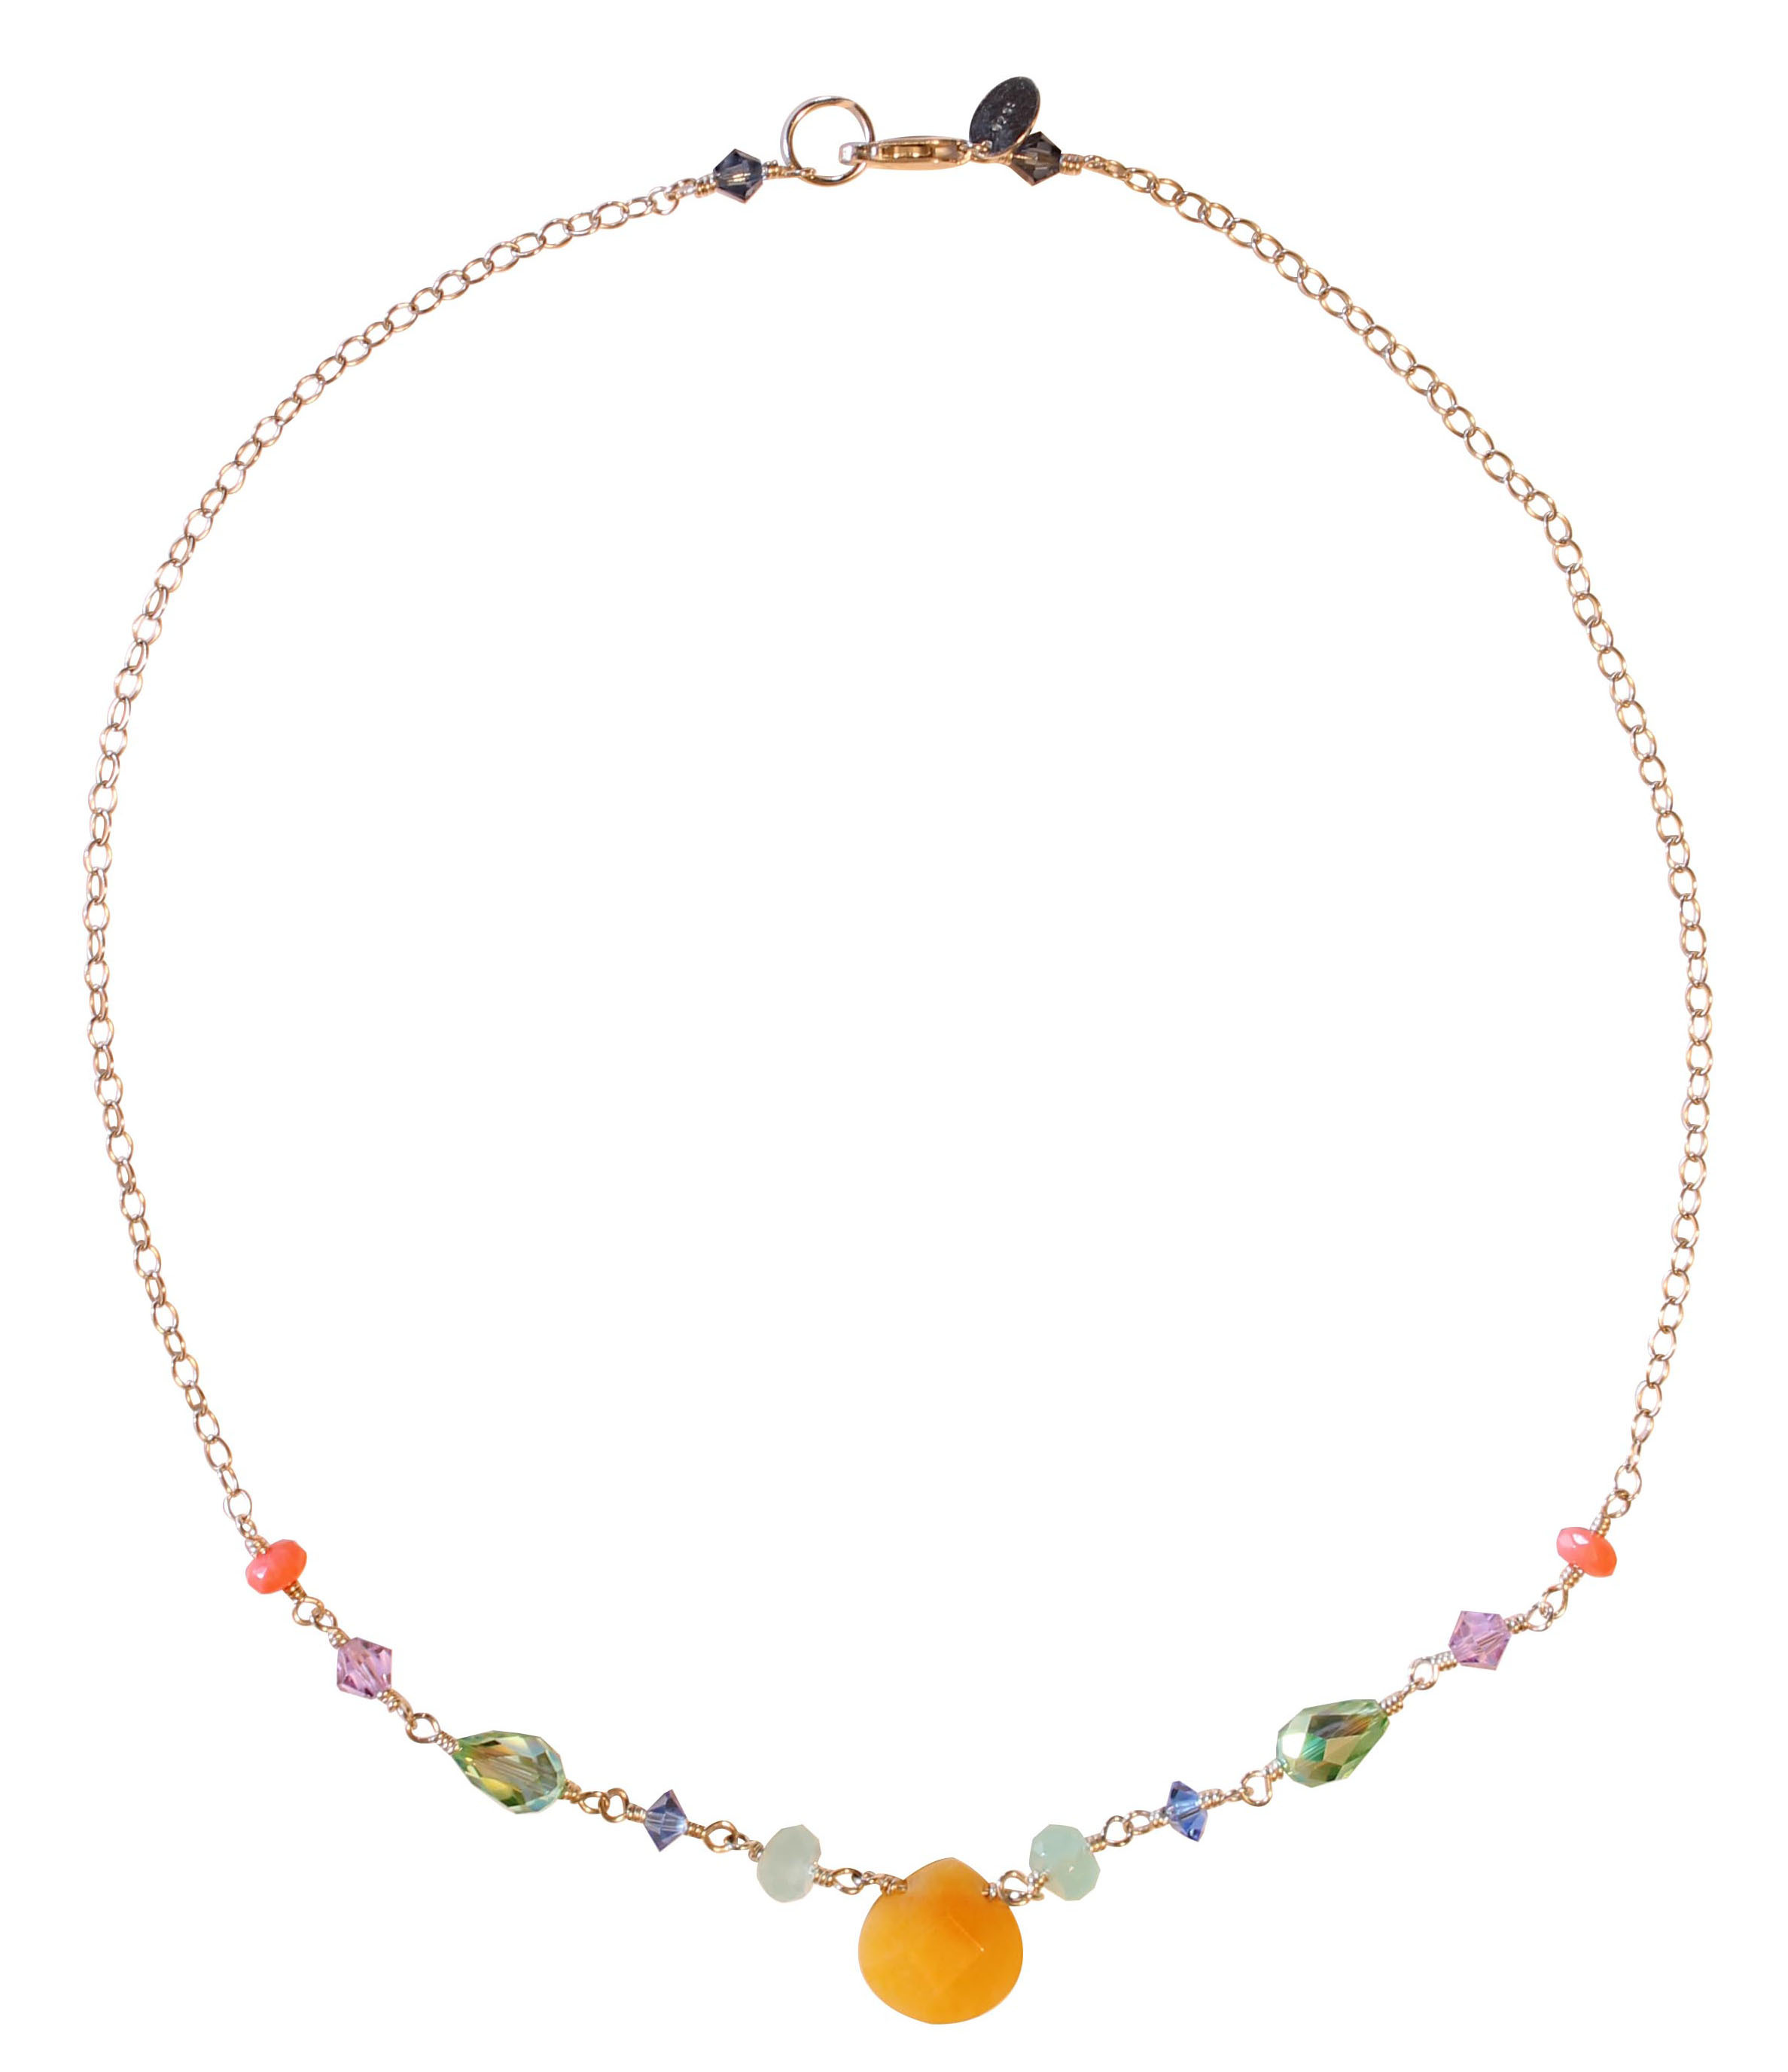 Colorful Crystal Jewelry • Swarovski Earrings, Bracelets and Necklaces ...